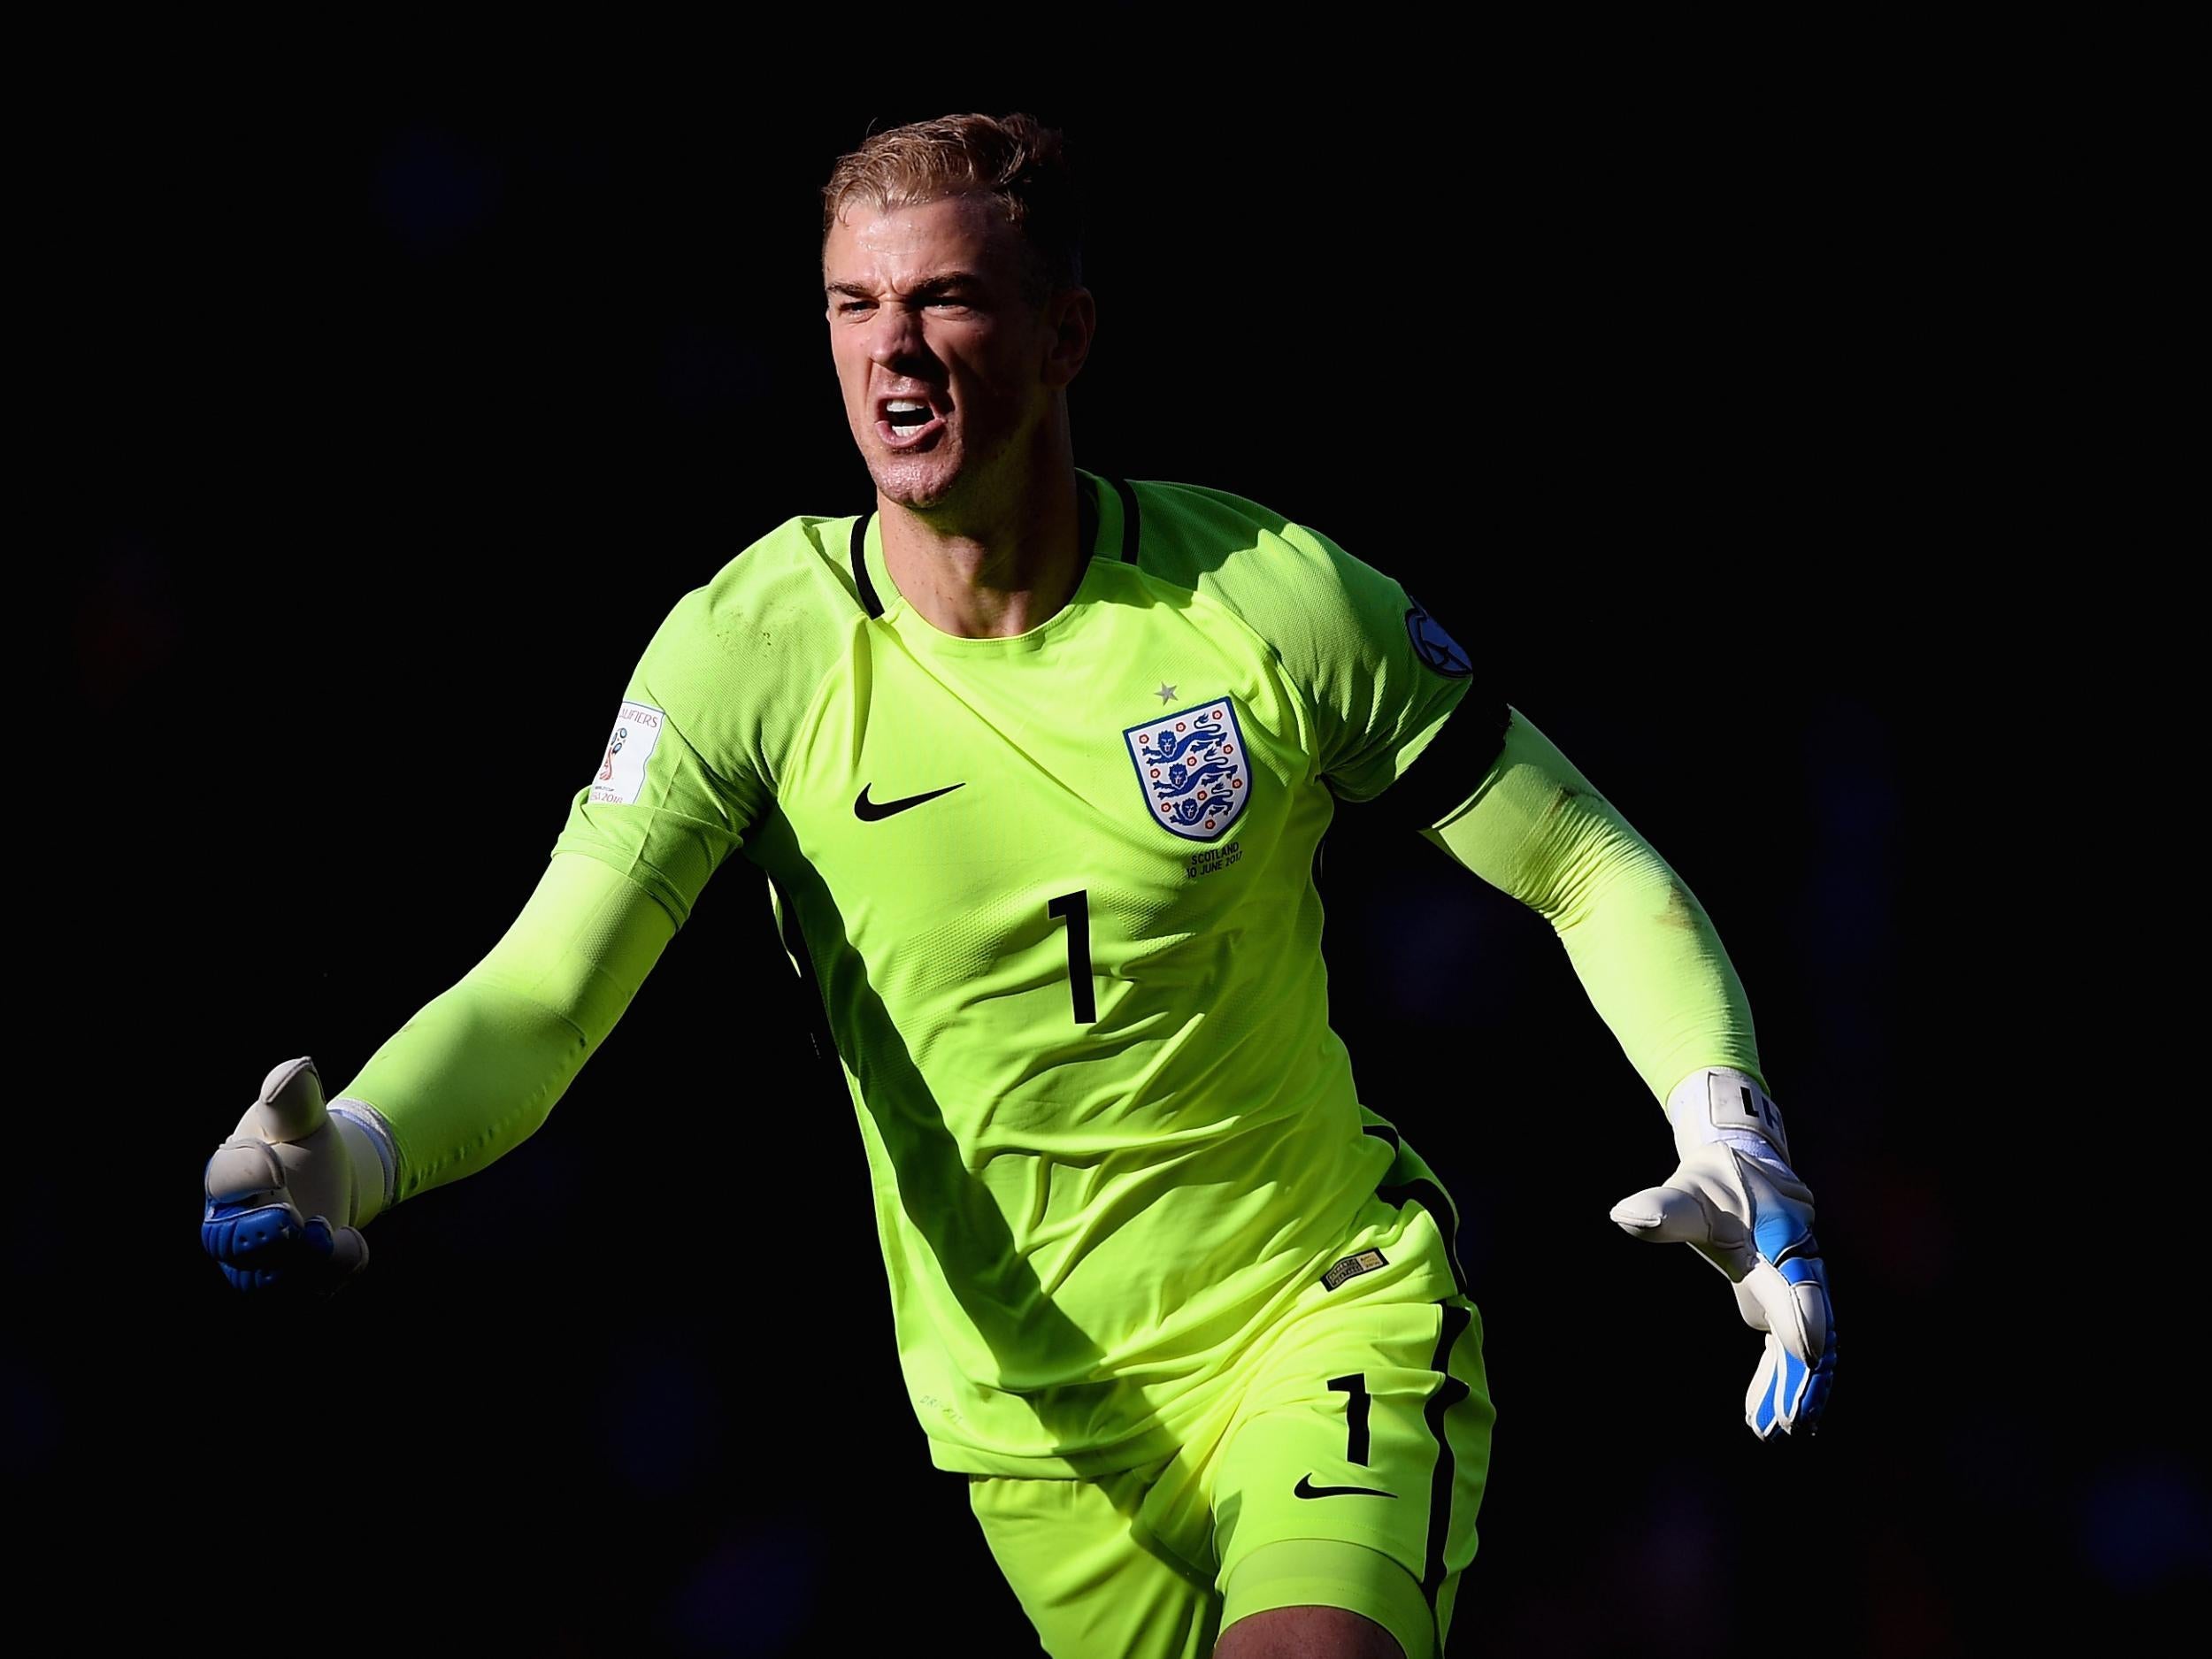 Hart is returning to City this summer after a season on loan at Torino